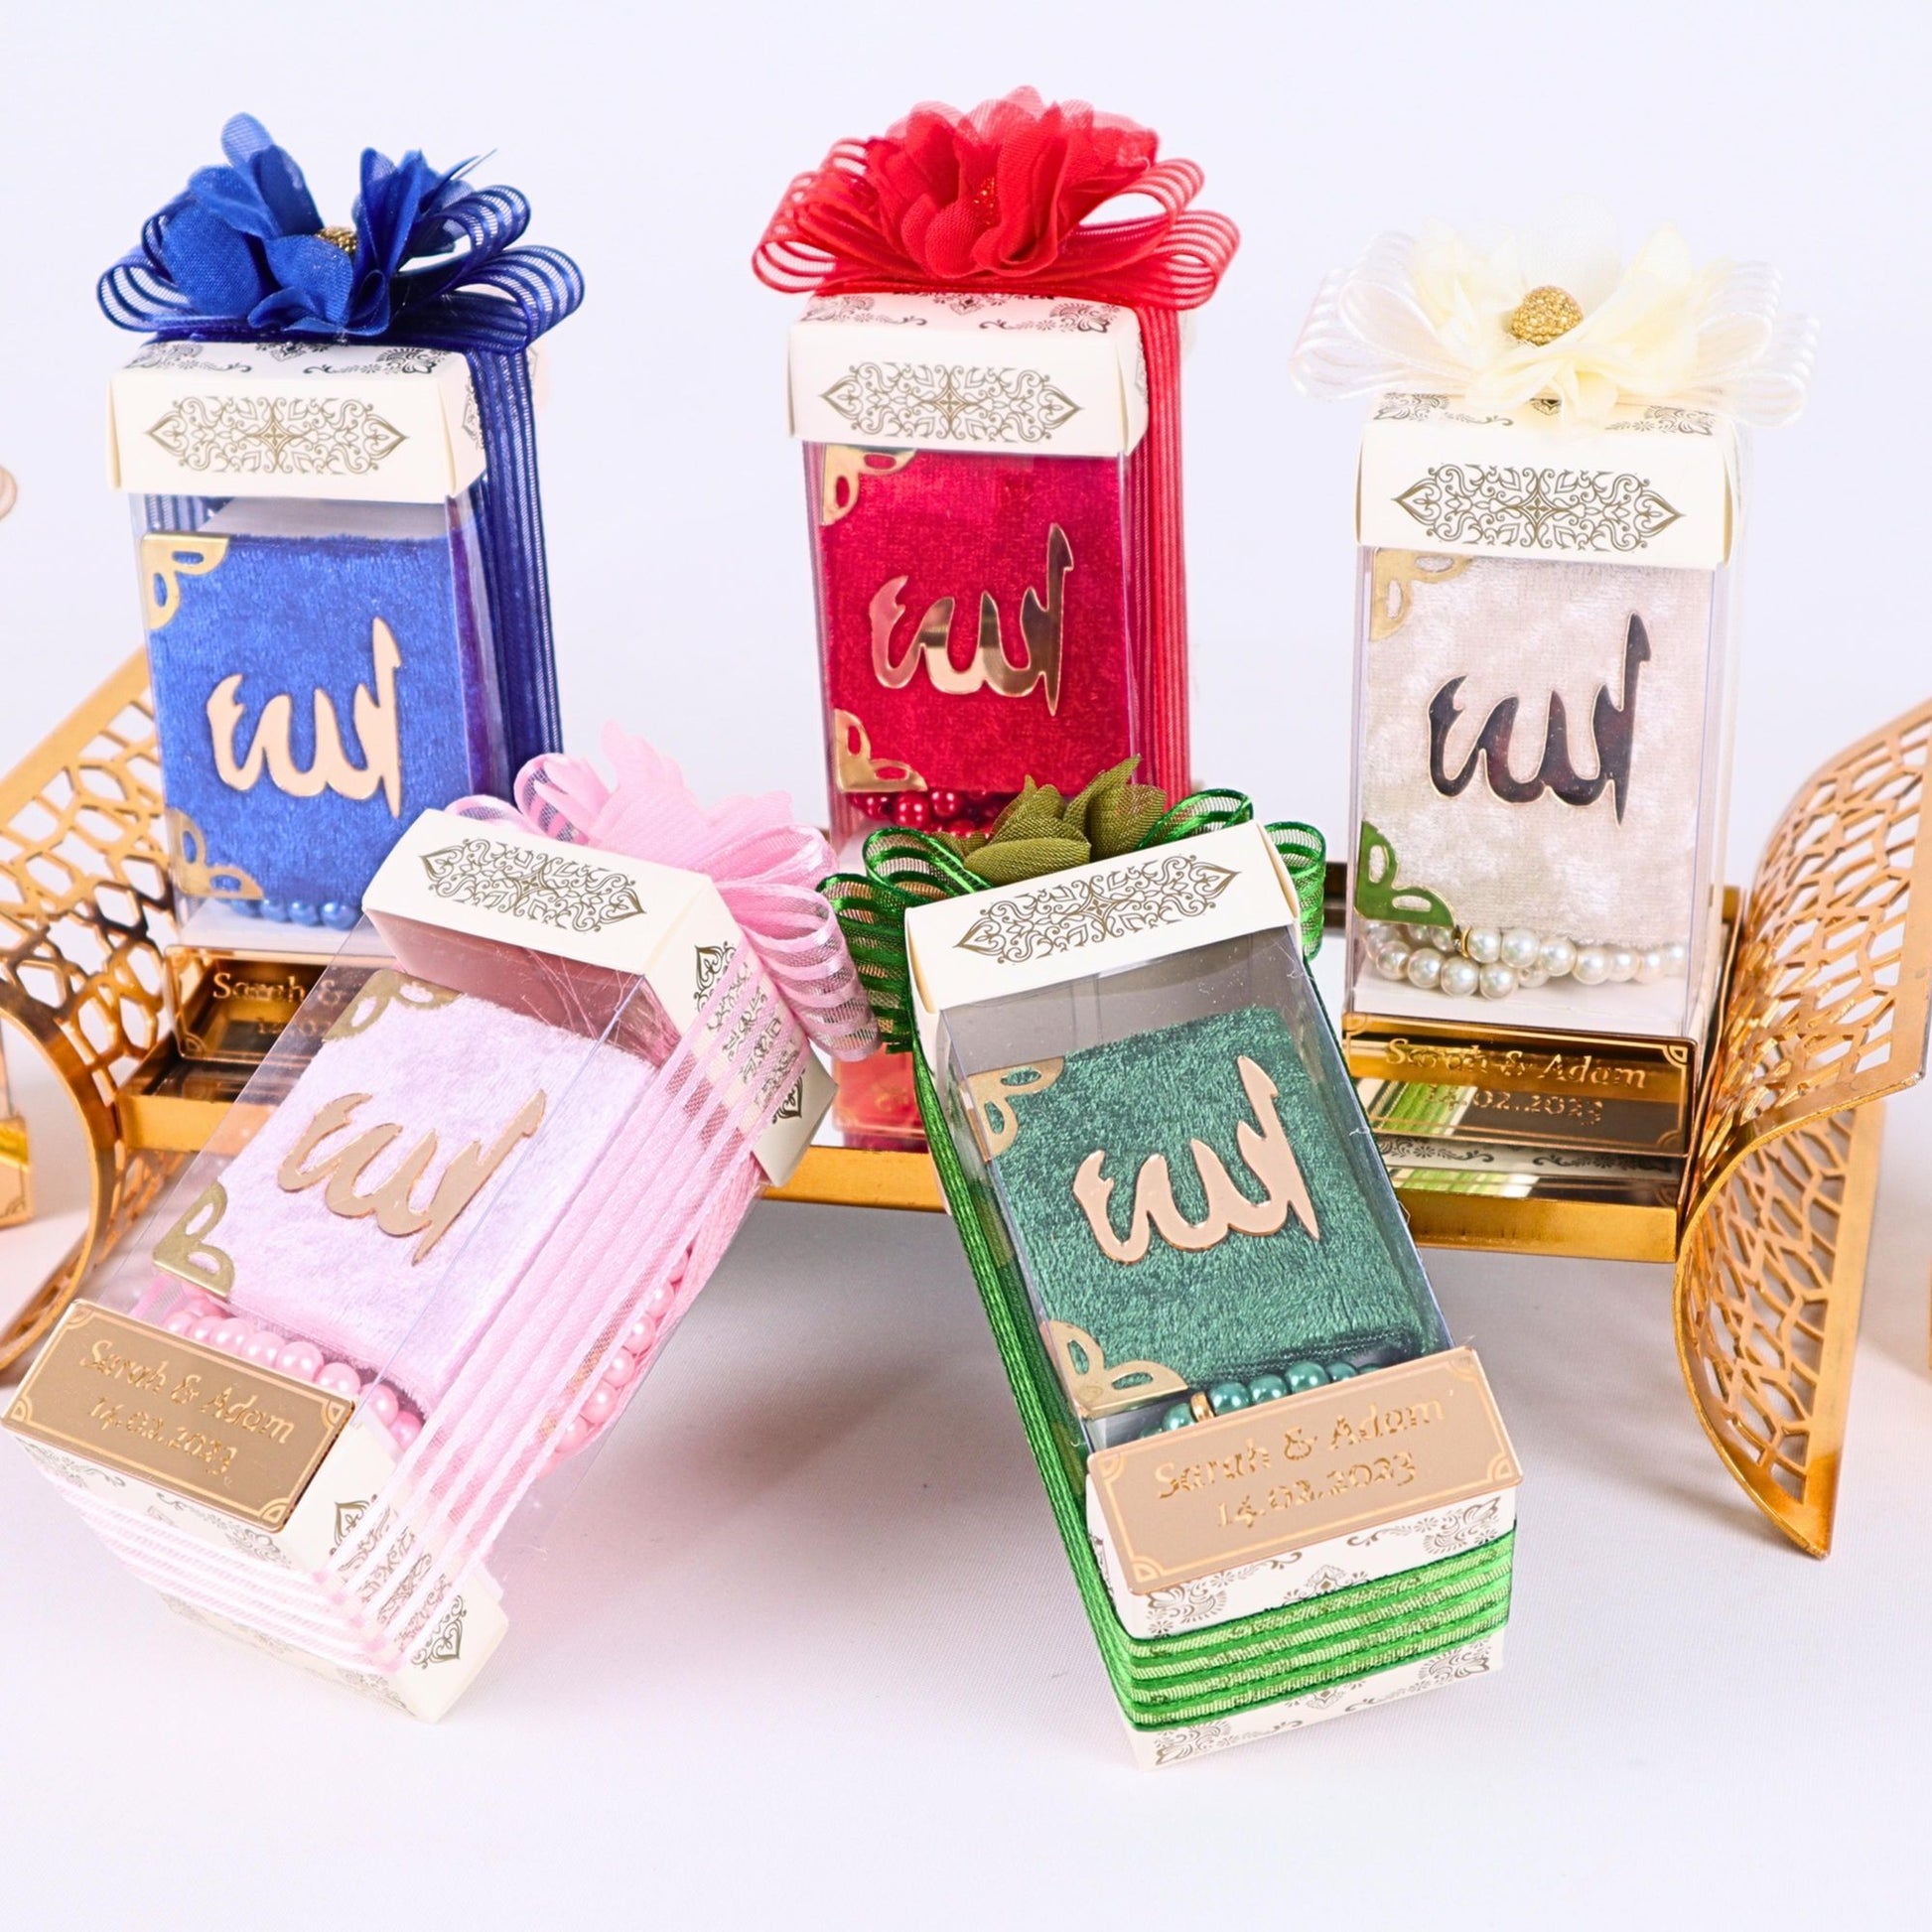 Personalized Velvet Mini Quran Pearl Tasbeeh Prism Box Wedding Favor - Islamic Elite Favors is a handmade gift shop offering a wide variety of unique and personalized gifts for all occasions. Whether you're looking for the perfect Ramadan, Eid, Hajj, wedding gift or something special for a birthday, baby shower or anniversary, we have something for everyone. High quality, made with love.